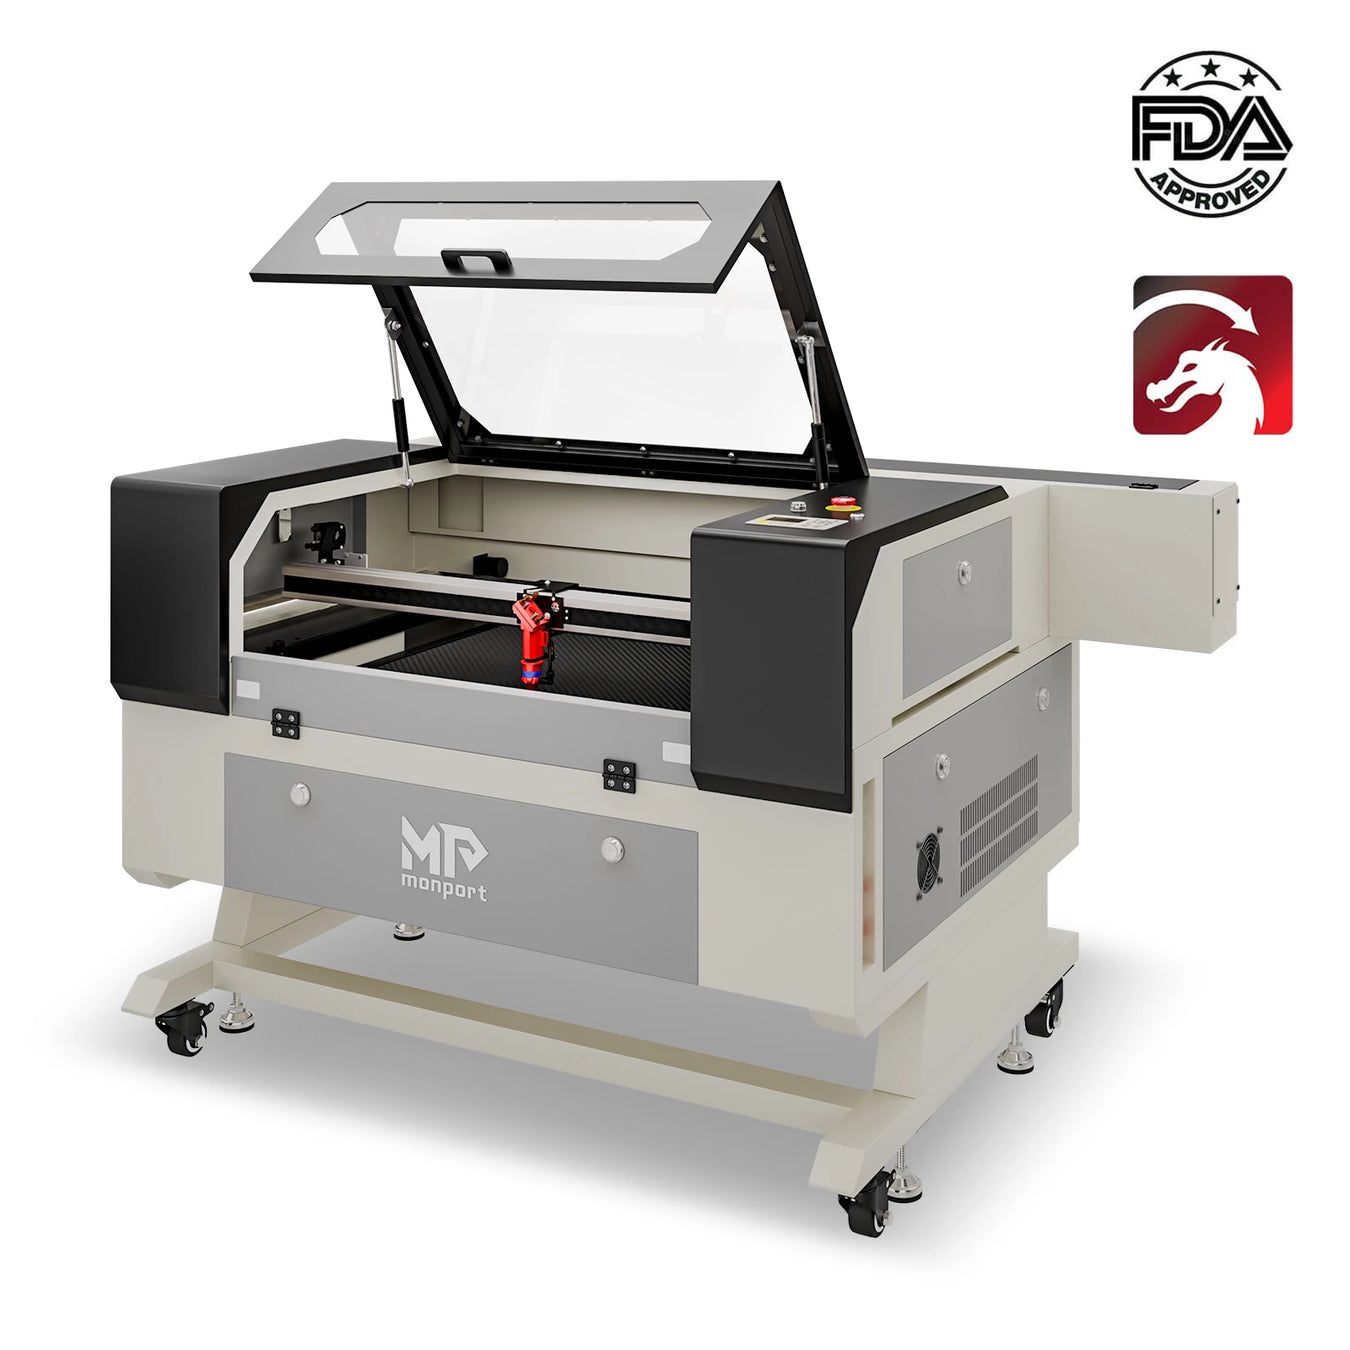 Mobility Protrude CO2 Laser Engravers